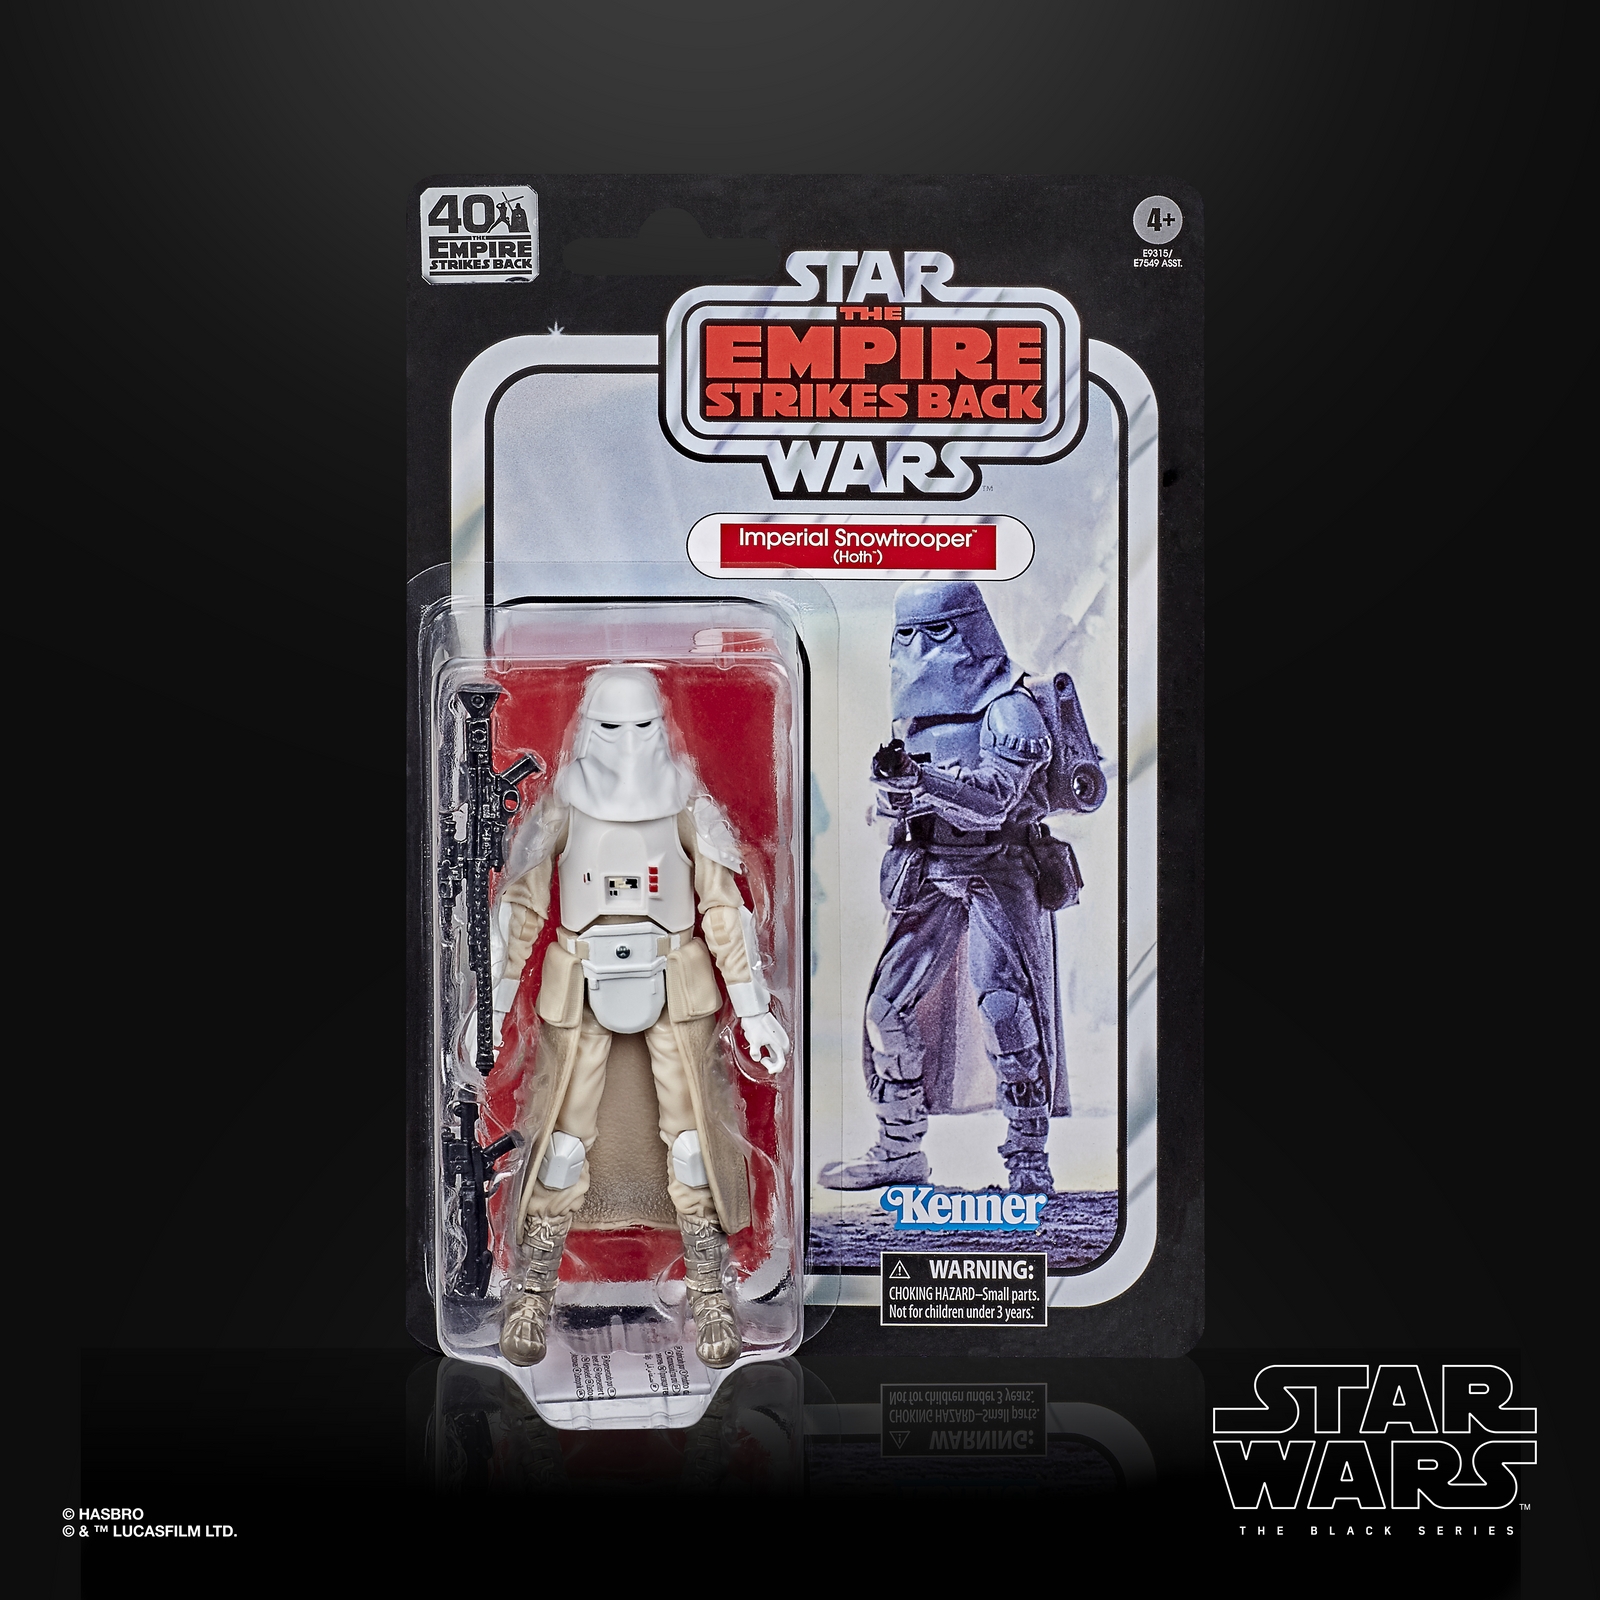 STAR WARS THE BLACK SERIES 40TH ANNIVERSARY 6-INCH Figure Assortment - IMPERIAL SNOWTROOPER - in pck.jpg